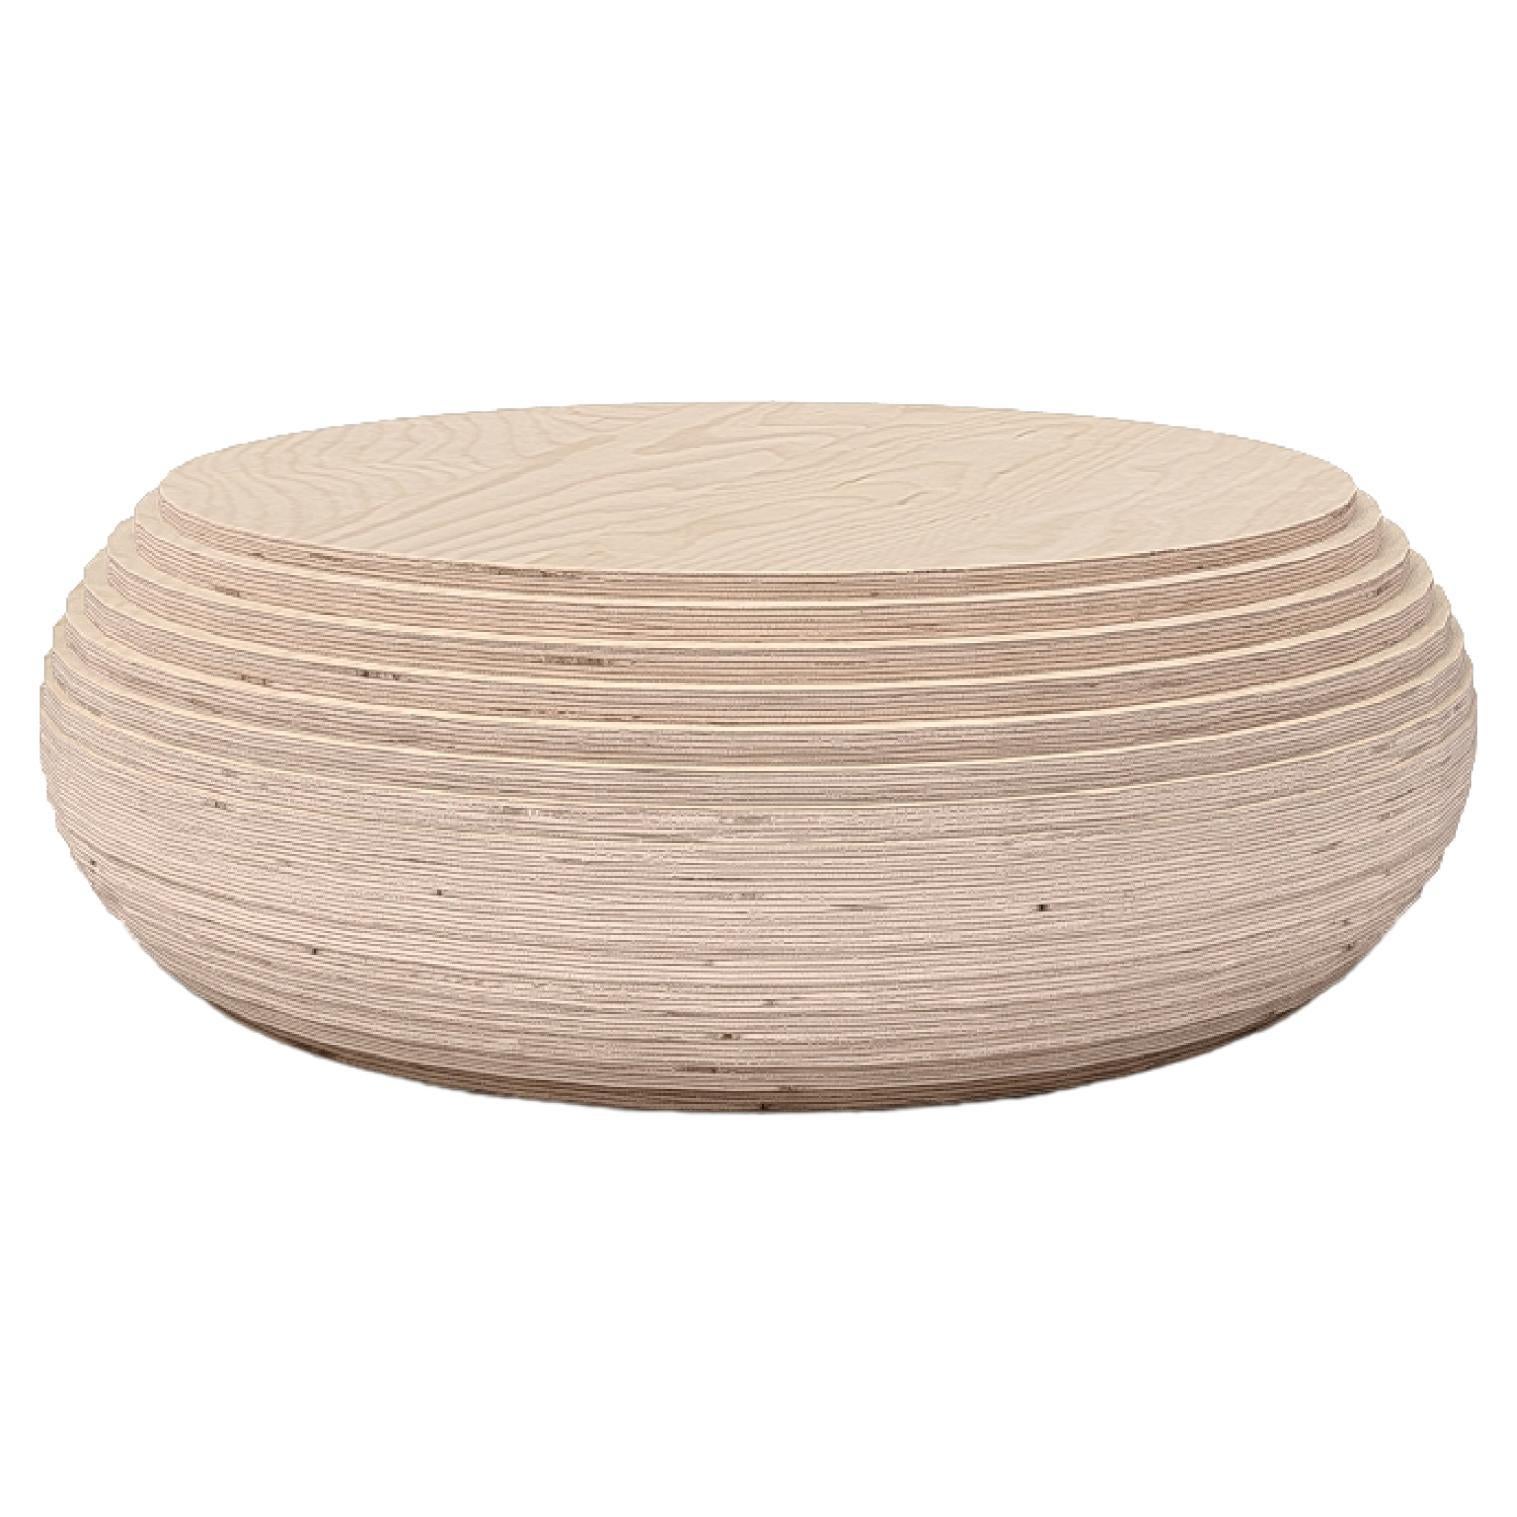 Cheese Large by Piegatto, une table basse sculpturale